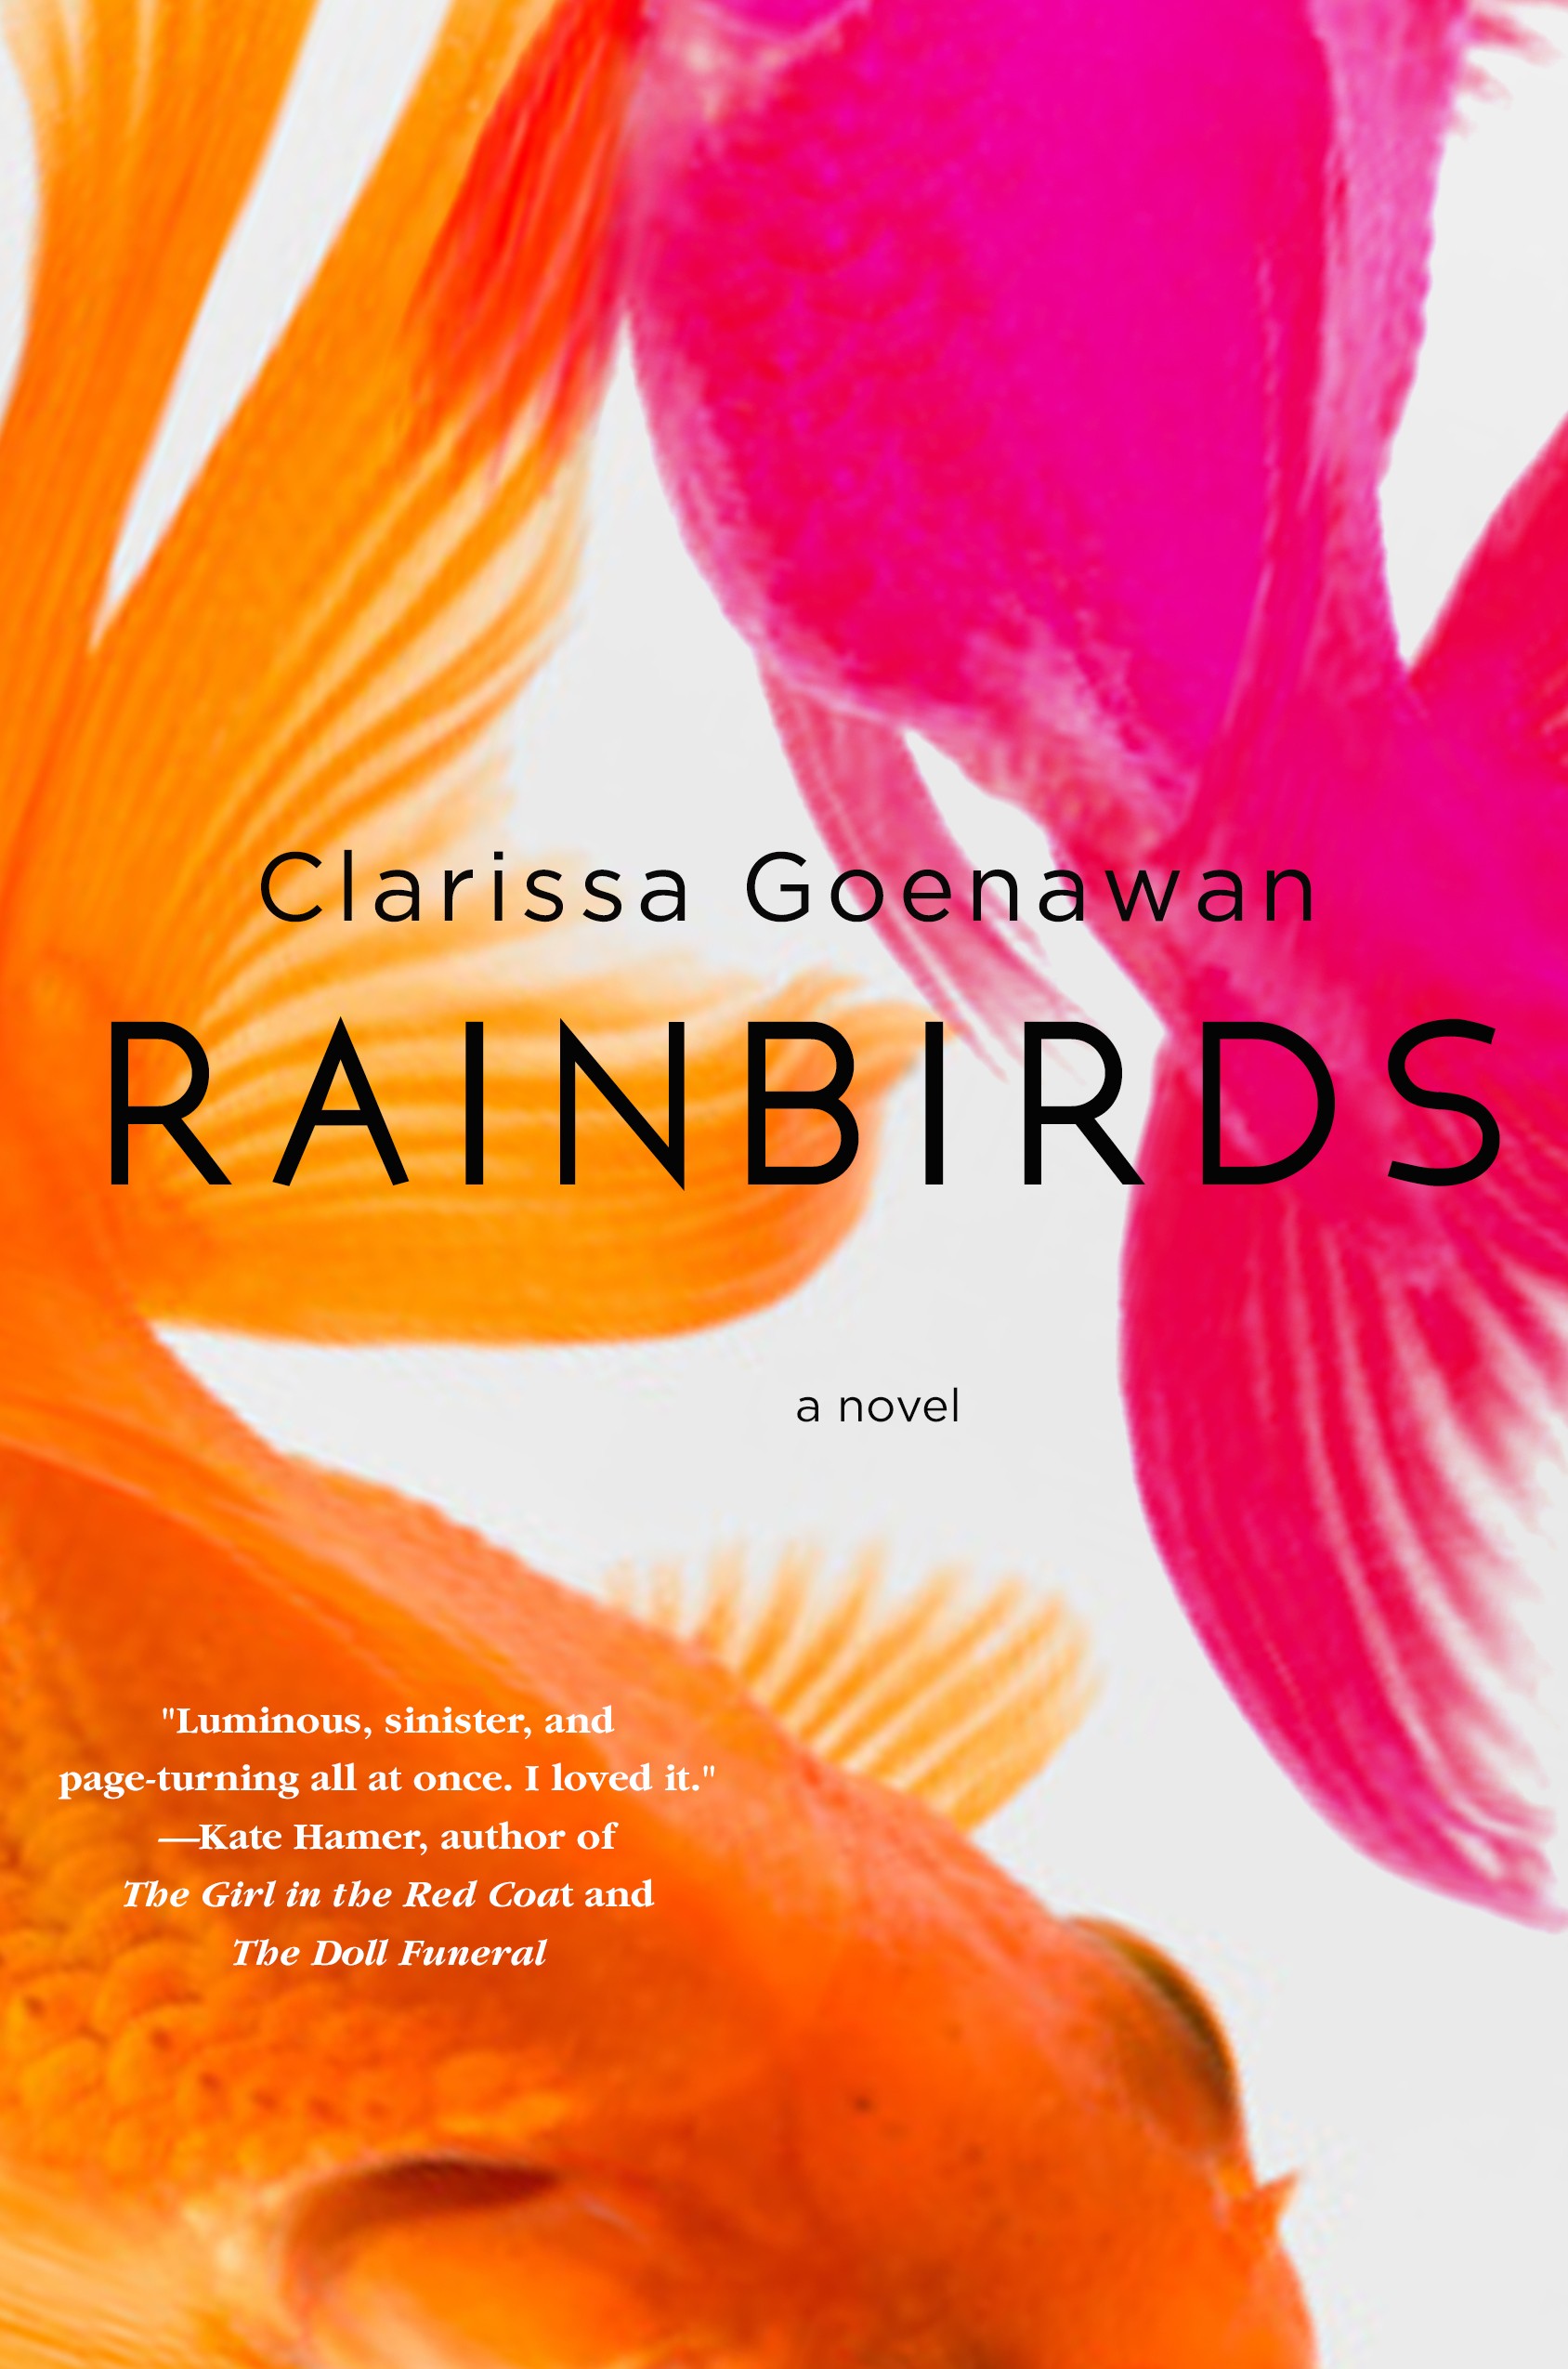 Singaporean author Clarissa Goenawan crafts an intriguing tale of a man whose life is sent spinning after his sister’s murder in a fictional Japanese town. Ren slips into the void left by his sister’s death, as he searches for answers